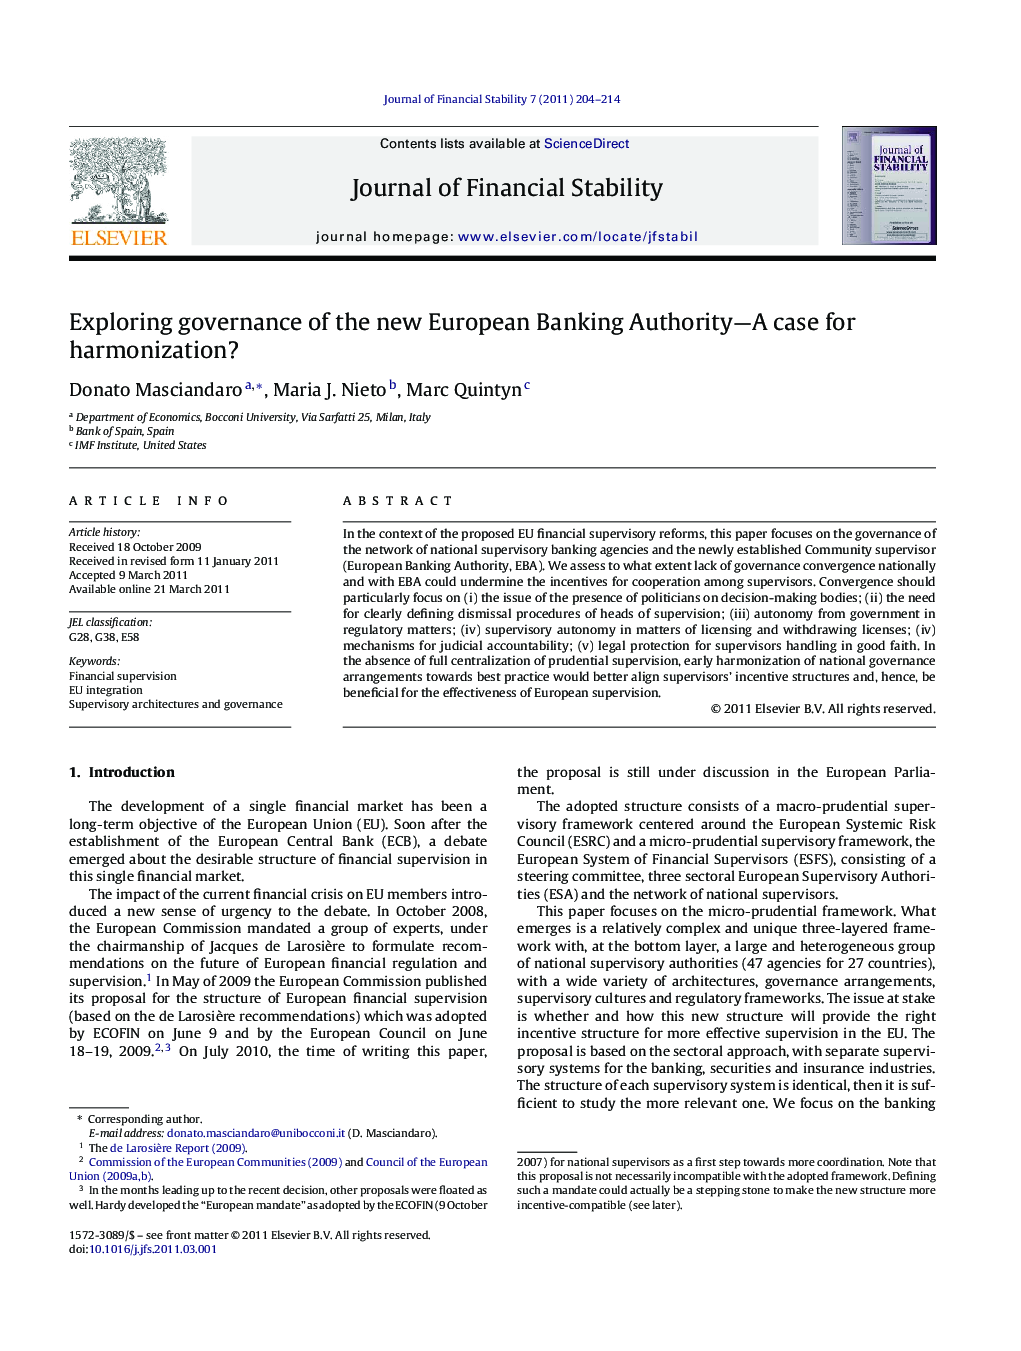 Exploring governance of the new European Banking Authority—A case for harmonization?